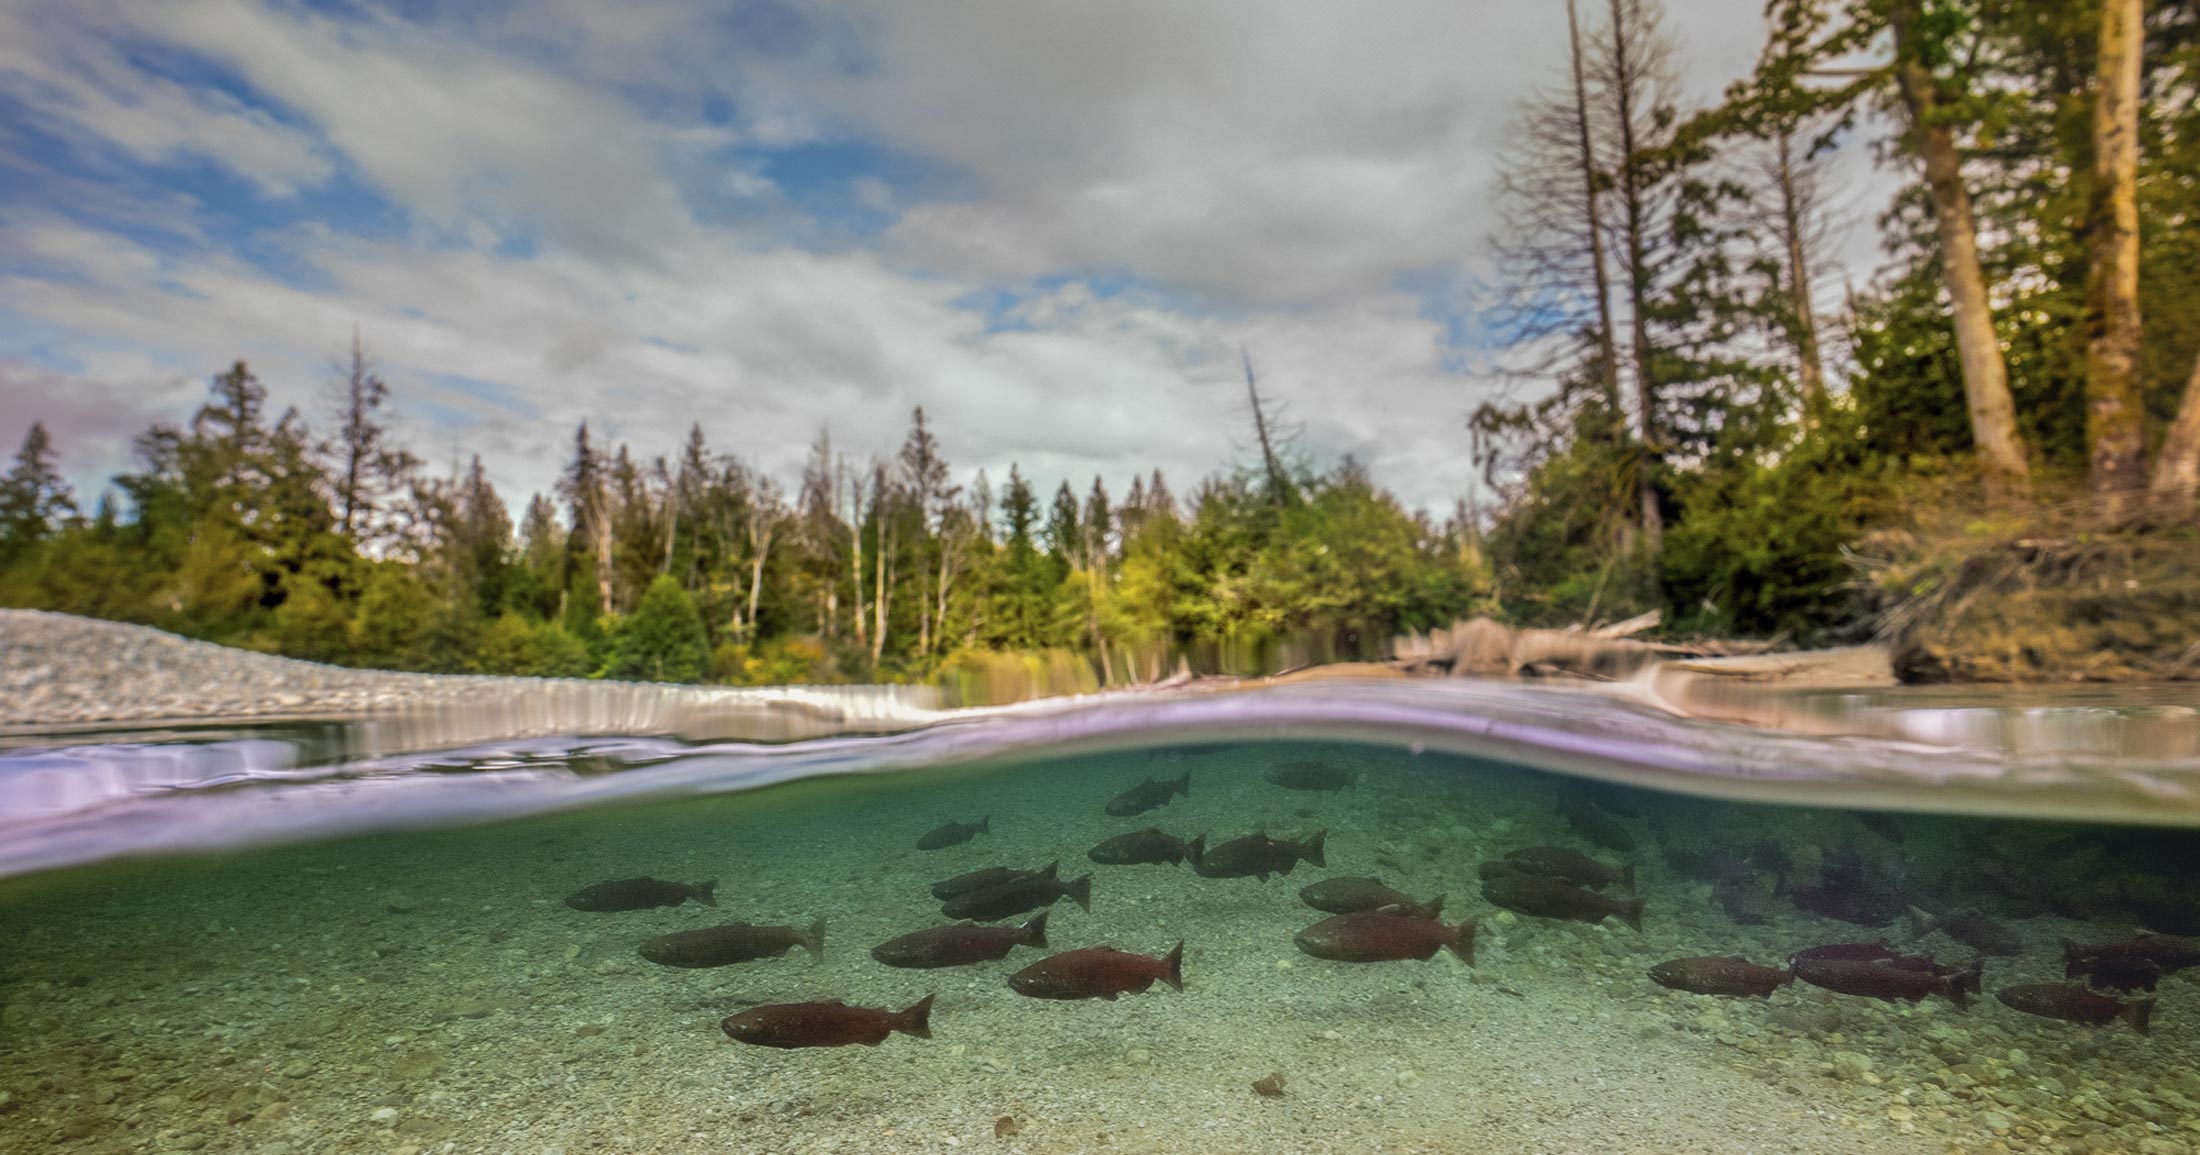 An underwater view of a school of salmon swimming above the gravel with shores and trees and forests in the background.